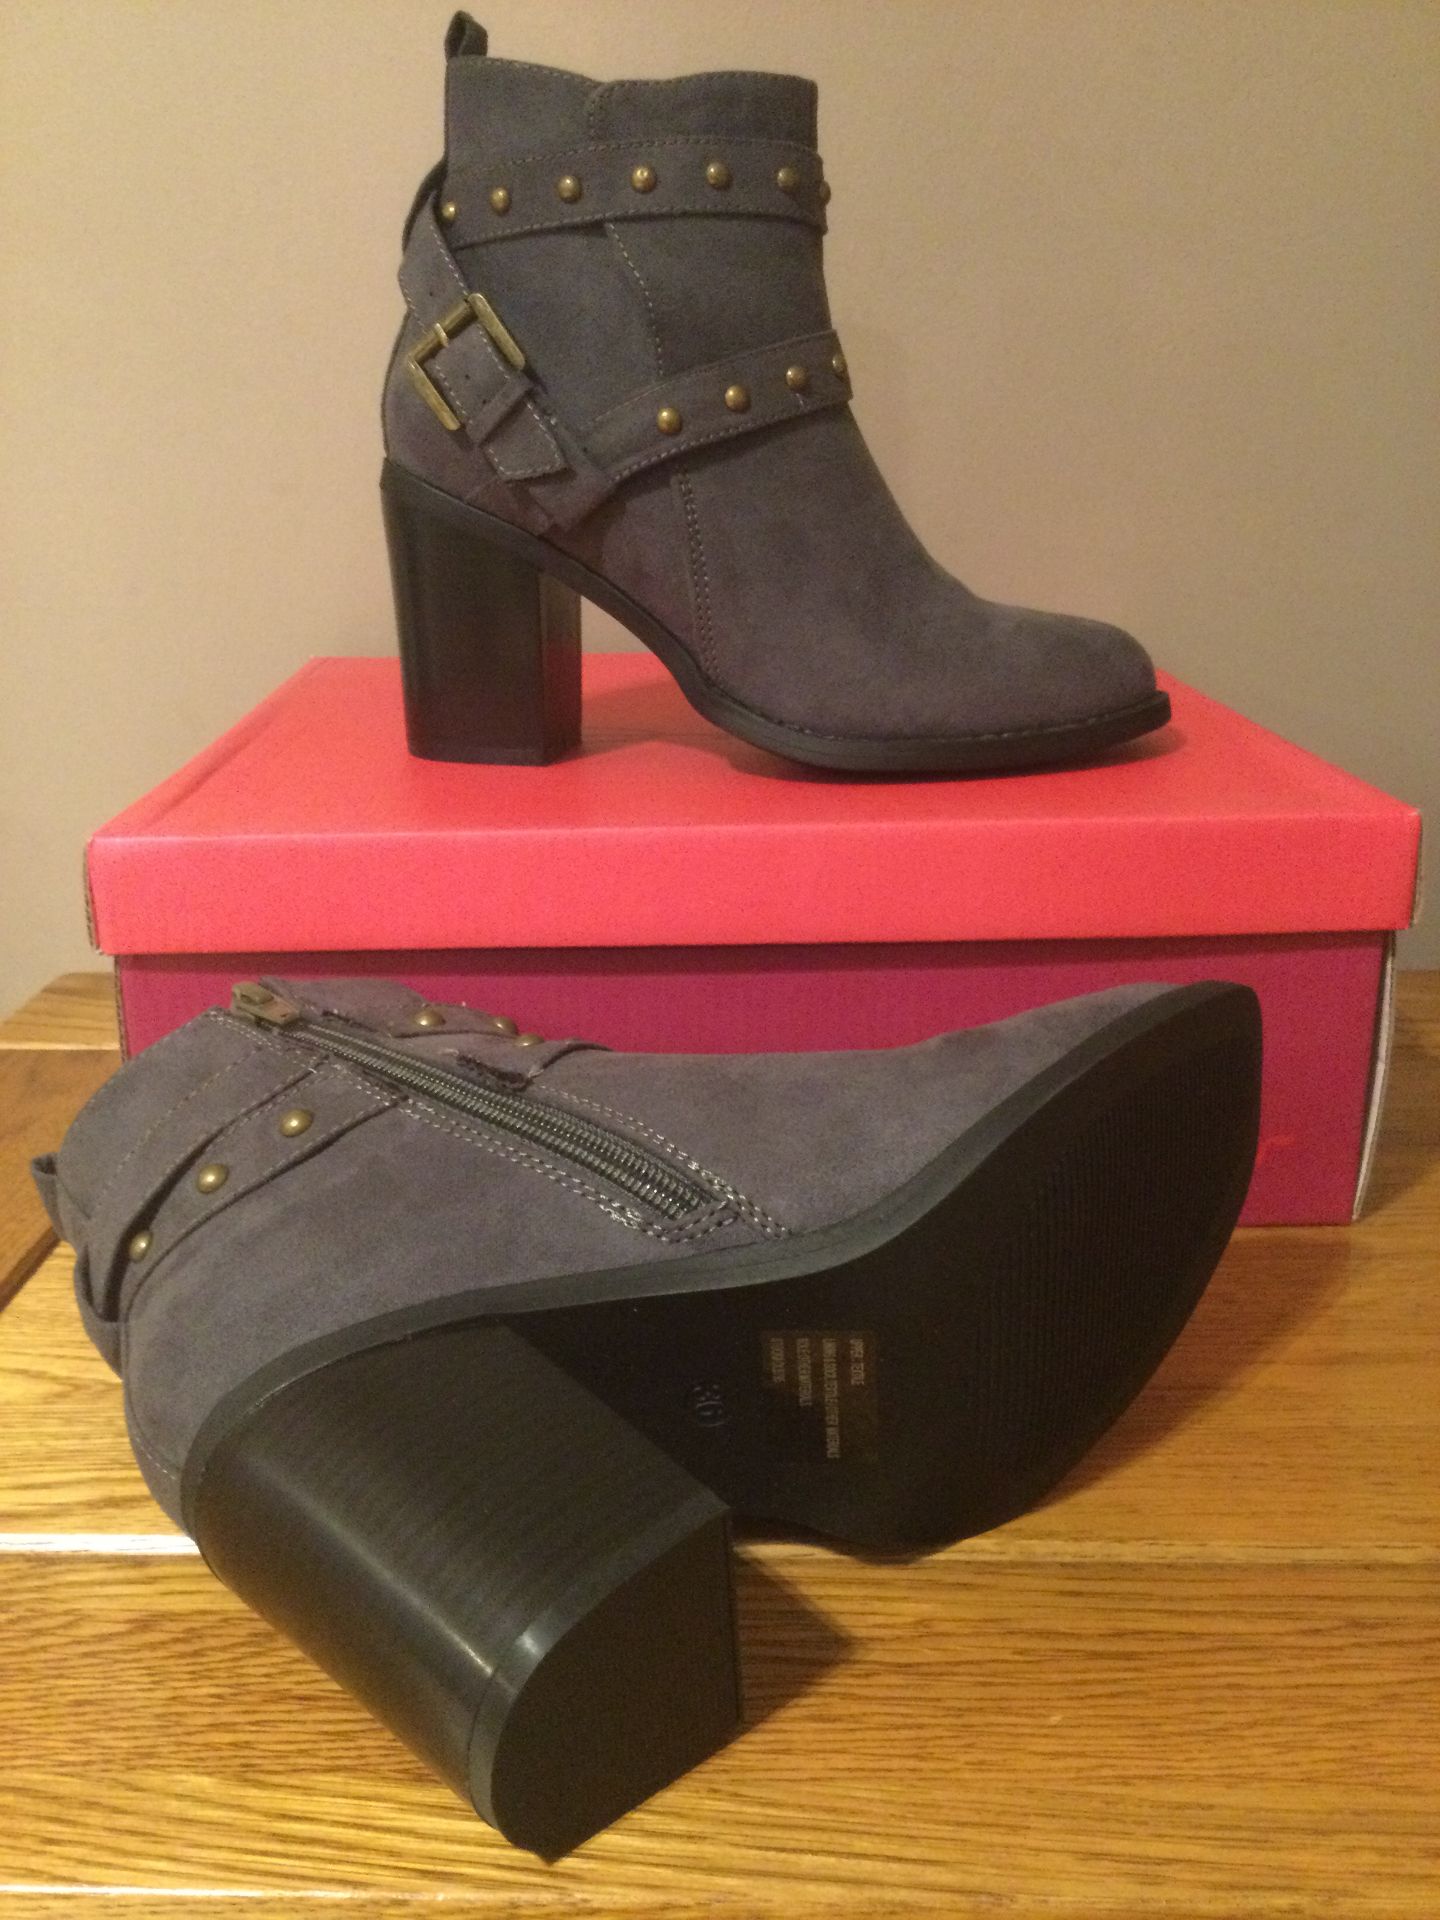 Dolcis “Piper” High Block Heel Ankle Boots, Size 7, Grey - New RRP £49.99 - Image 4 of 6